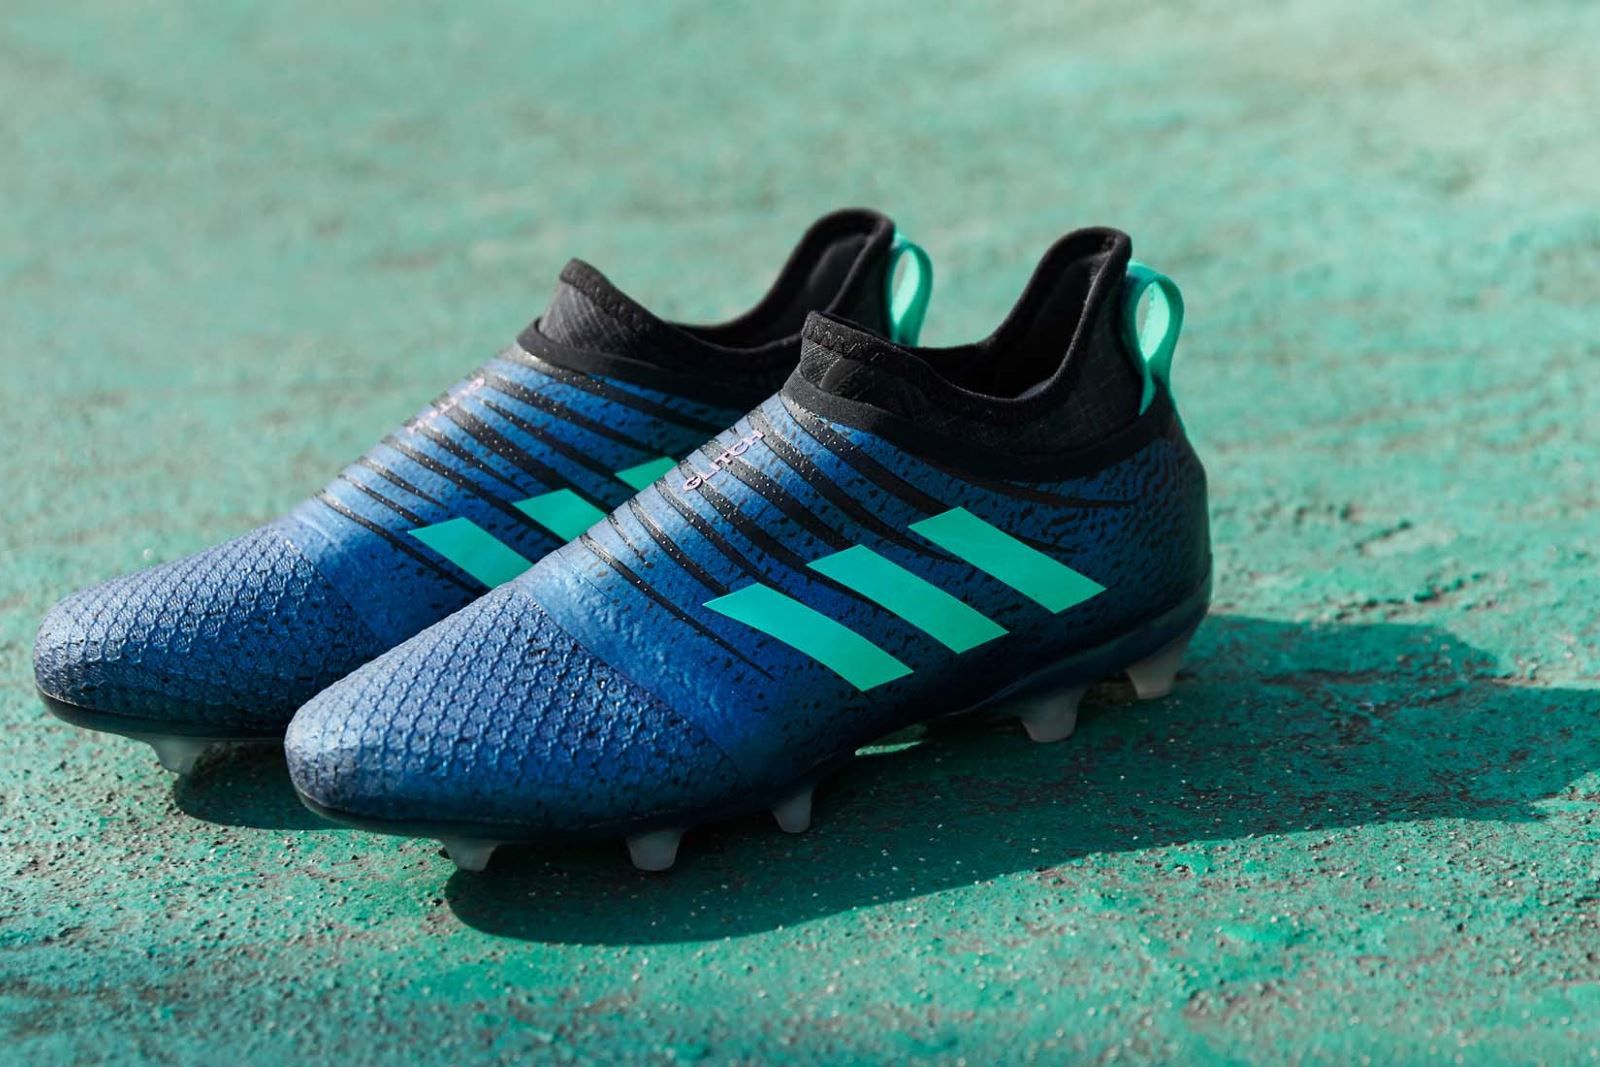 We speak to the designer of Adidas interchangeable skin football boots image 1